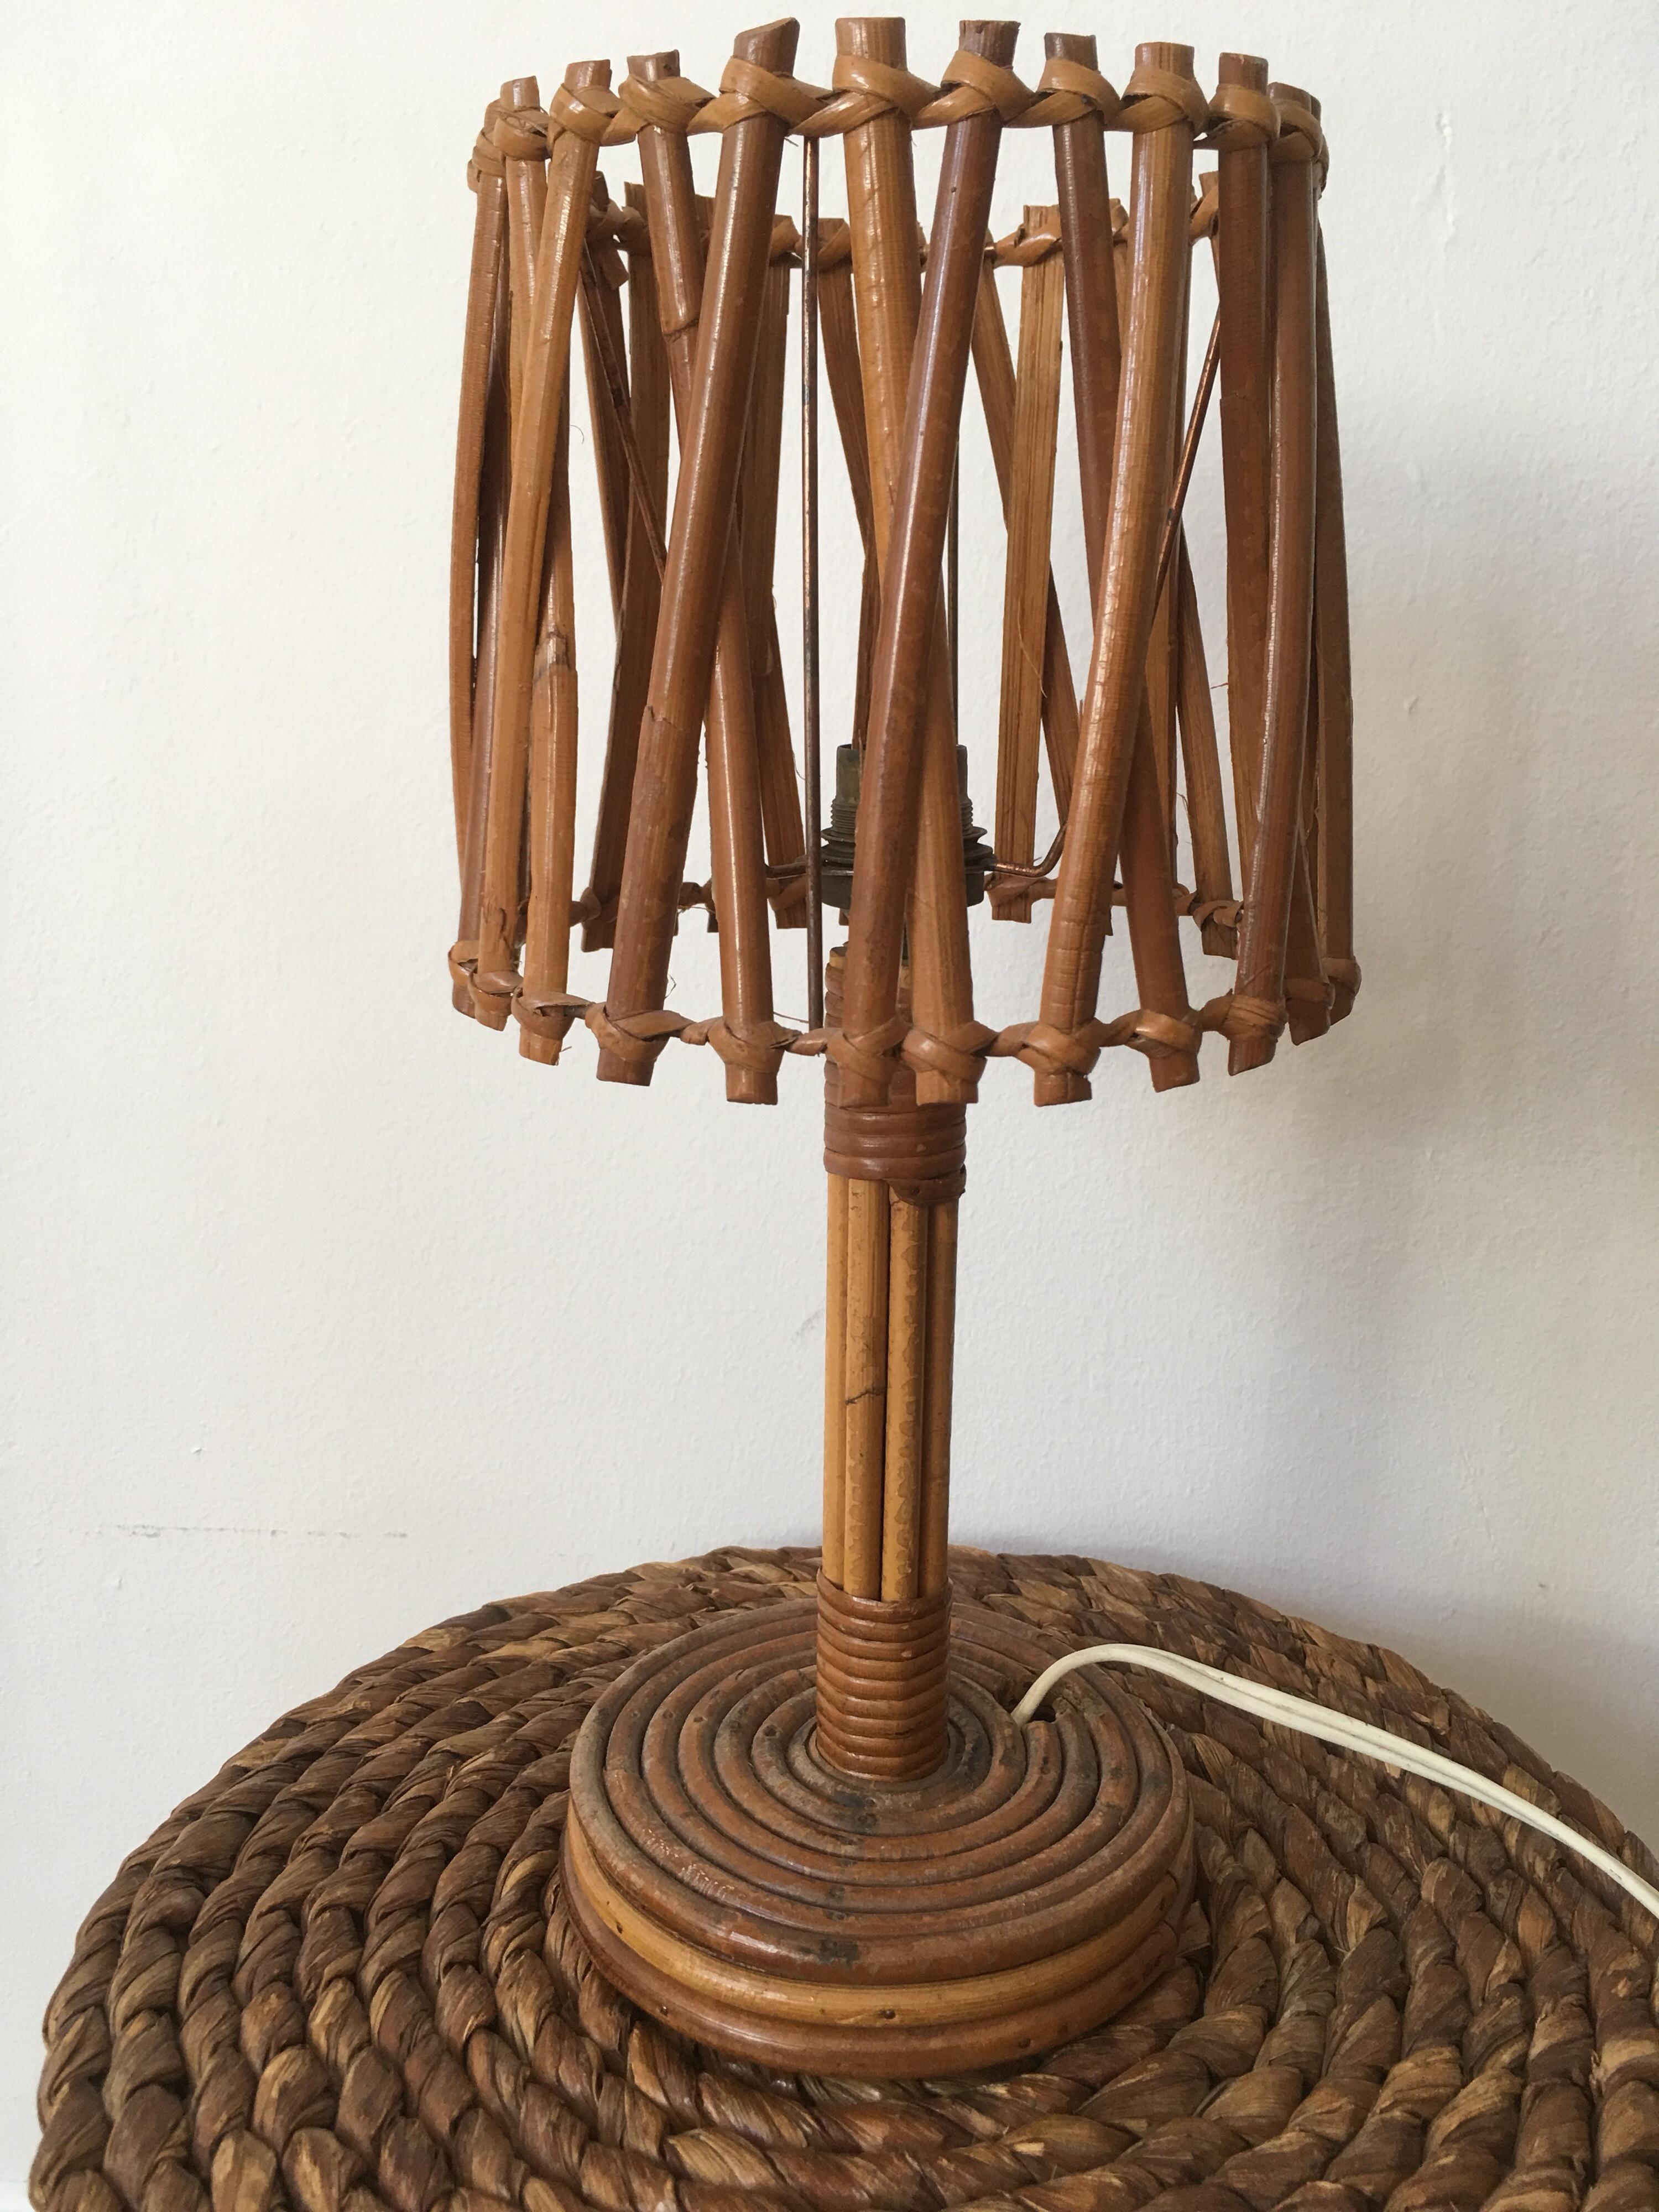 Rare rattan table lamp designed by Louis Sognot in France in 1950s.
Original rattan lampshade and on/off switch.
Perfect light with a rope bedside by Audoux-Minet.